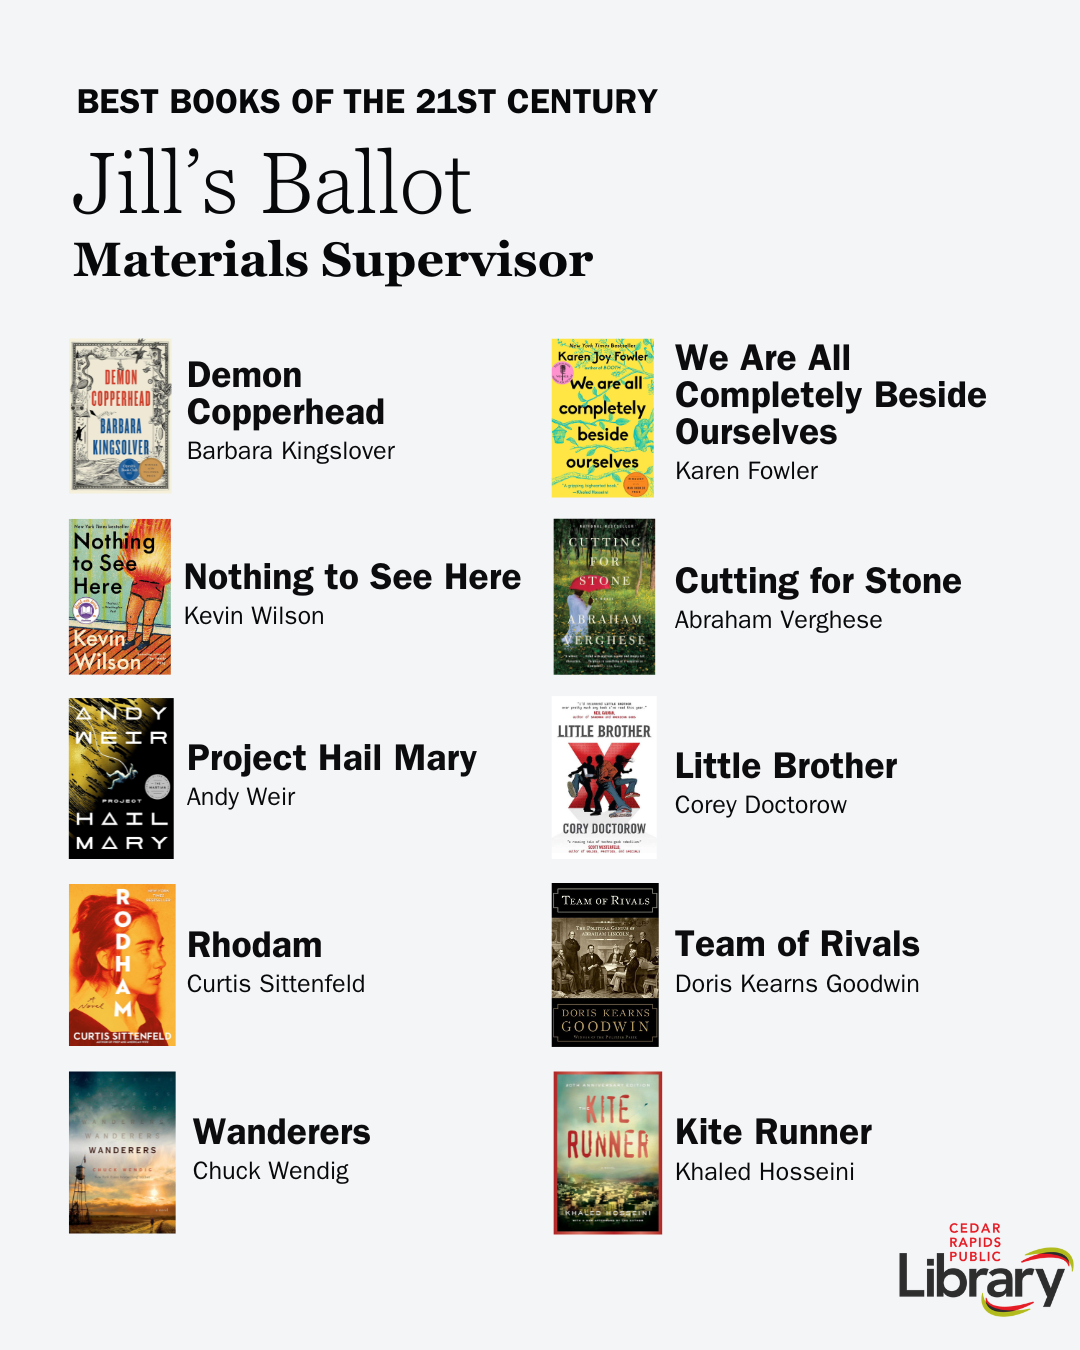 A graphic shows Materials Supervisor Jill's Ballot for Best Books of the 21st Century